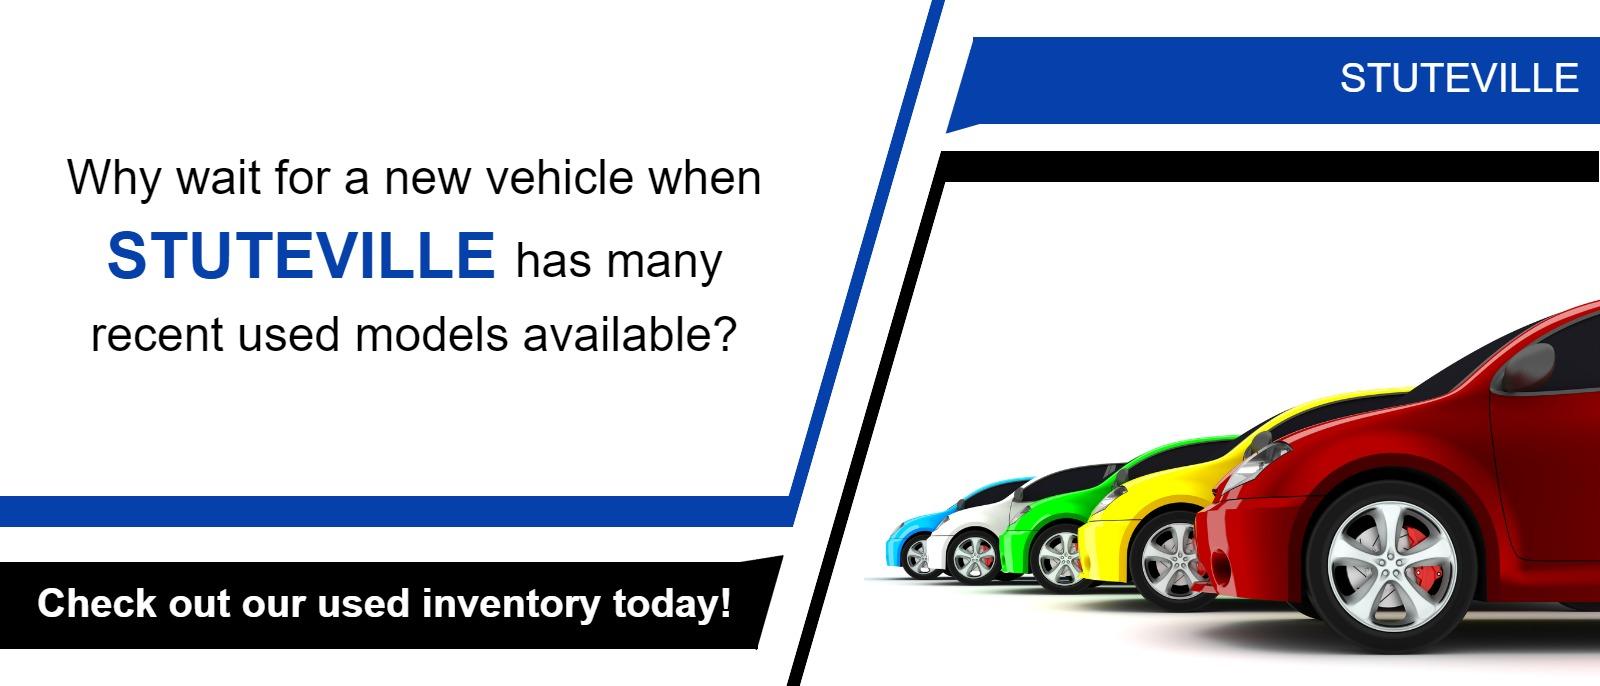 Why wait for a new vehicle when
STUTEVILLE has many
recent used models available?

Check out our used inventory today!